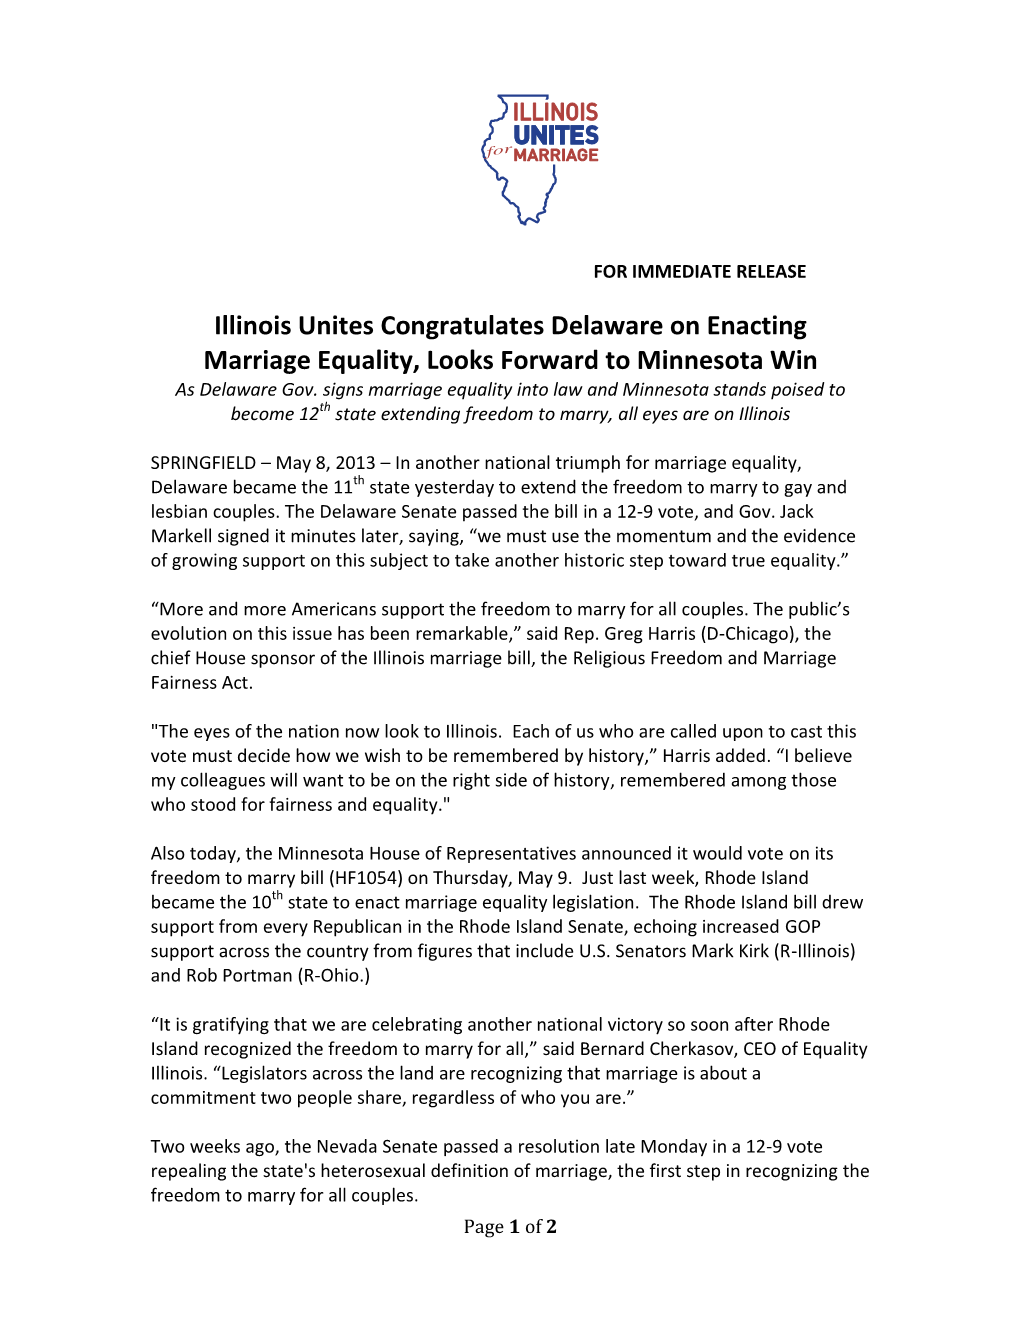 Illinois Unites Congratulates Delaware on Enacting Marriage Equality, Looks Forward to Minnesota Win As Delaware Gov